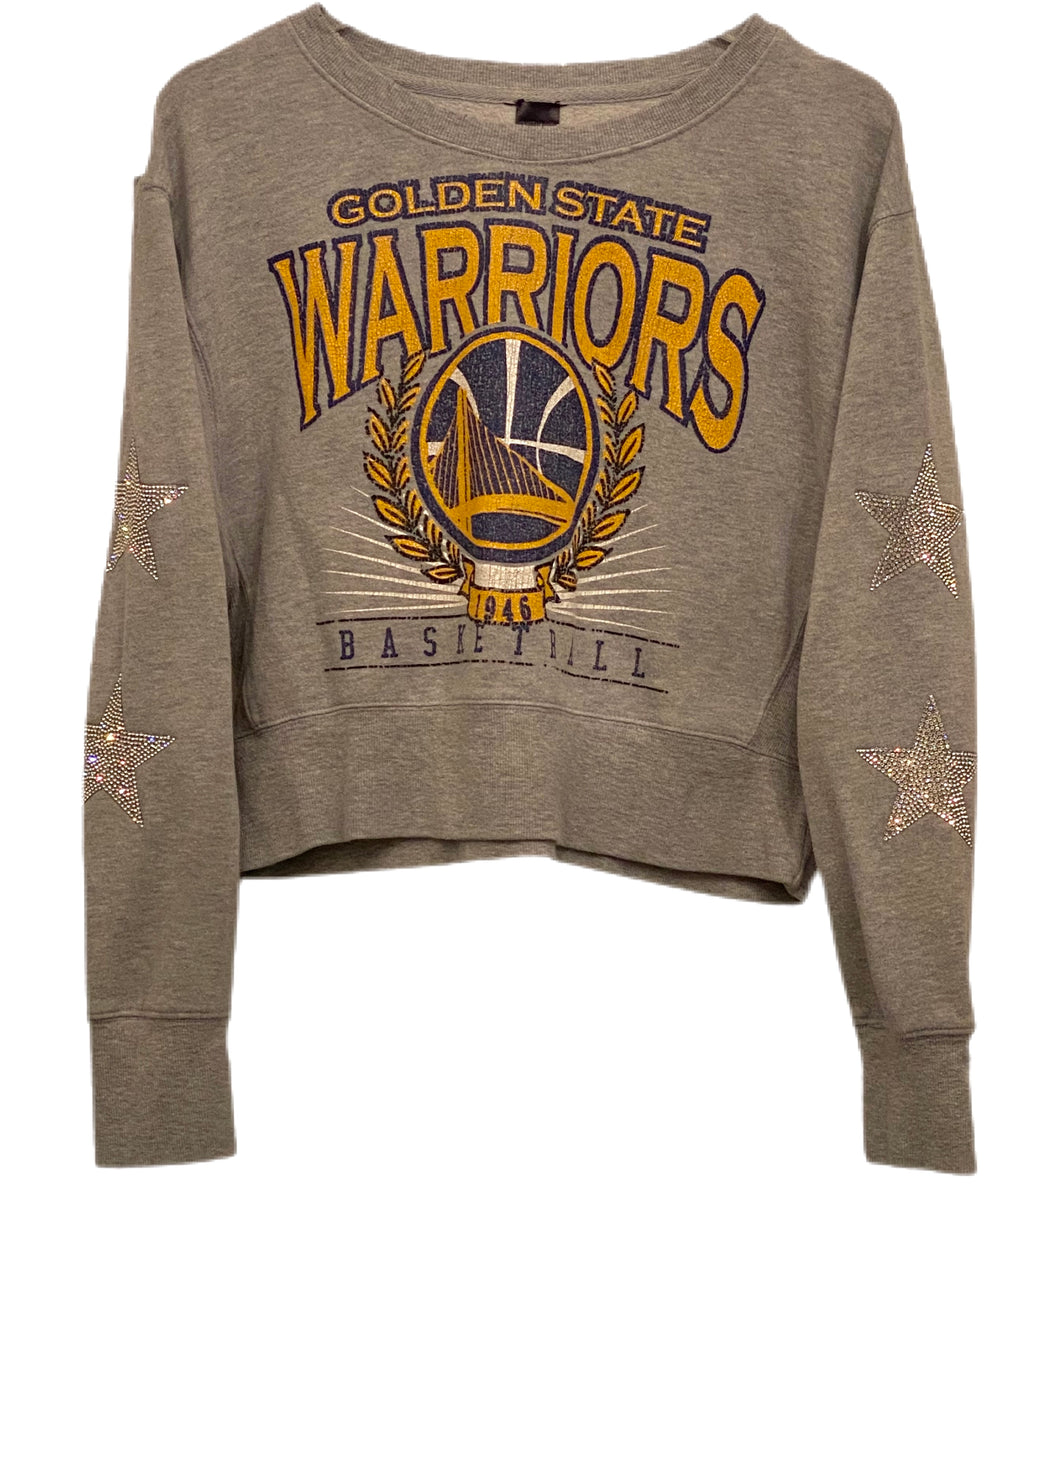 Golden State Warriors, NBA One of a KIND Vintage Cropped Sweatshirt with Crystal Star Design